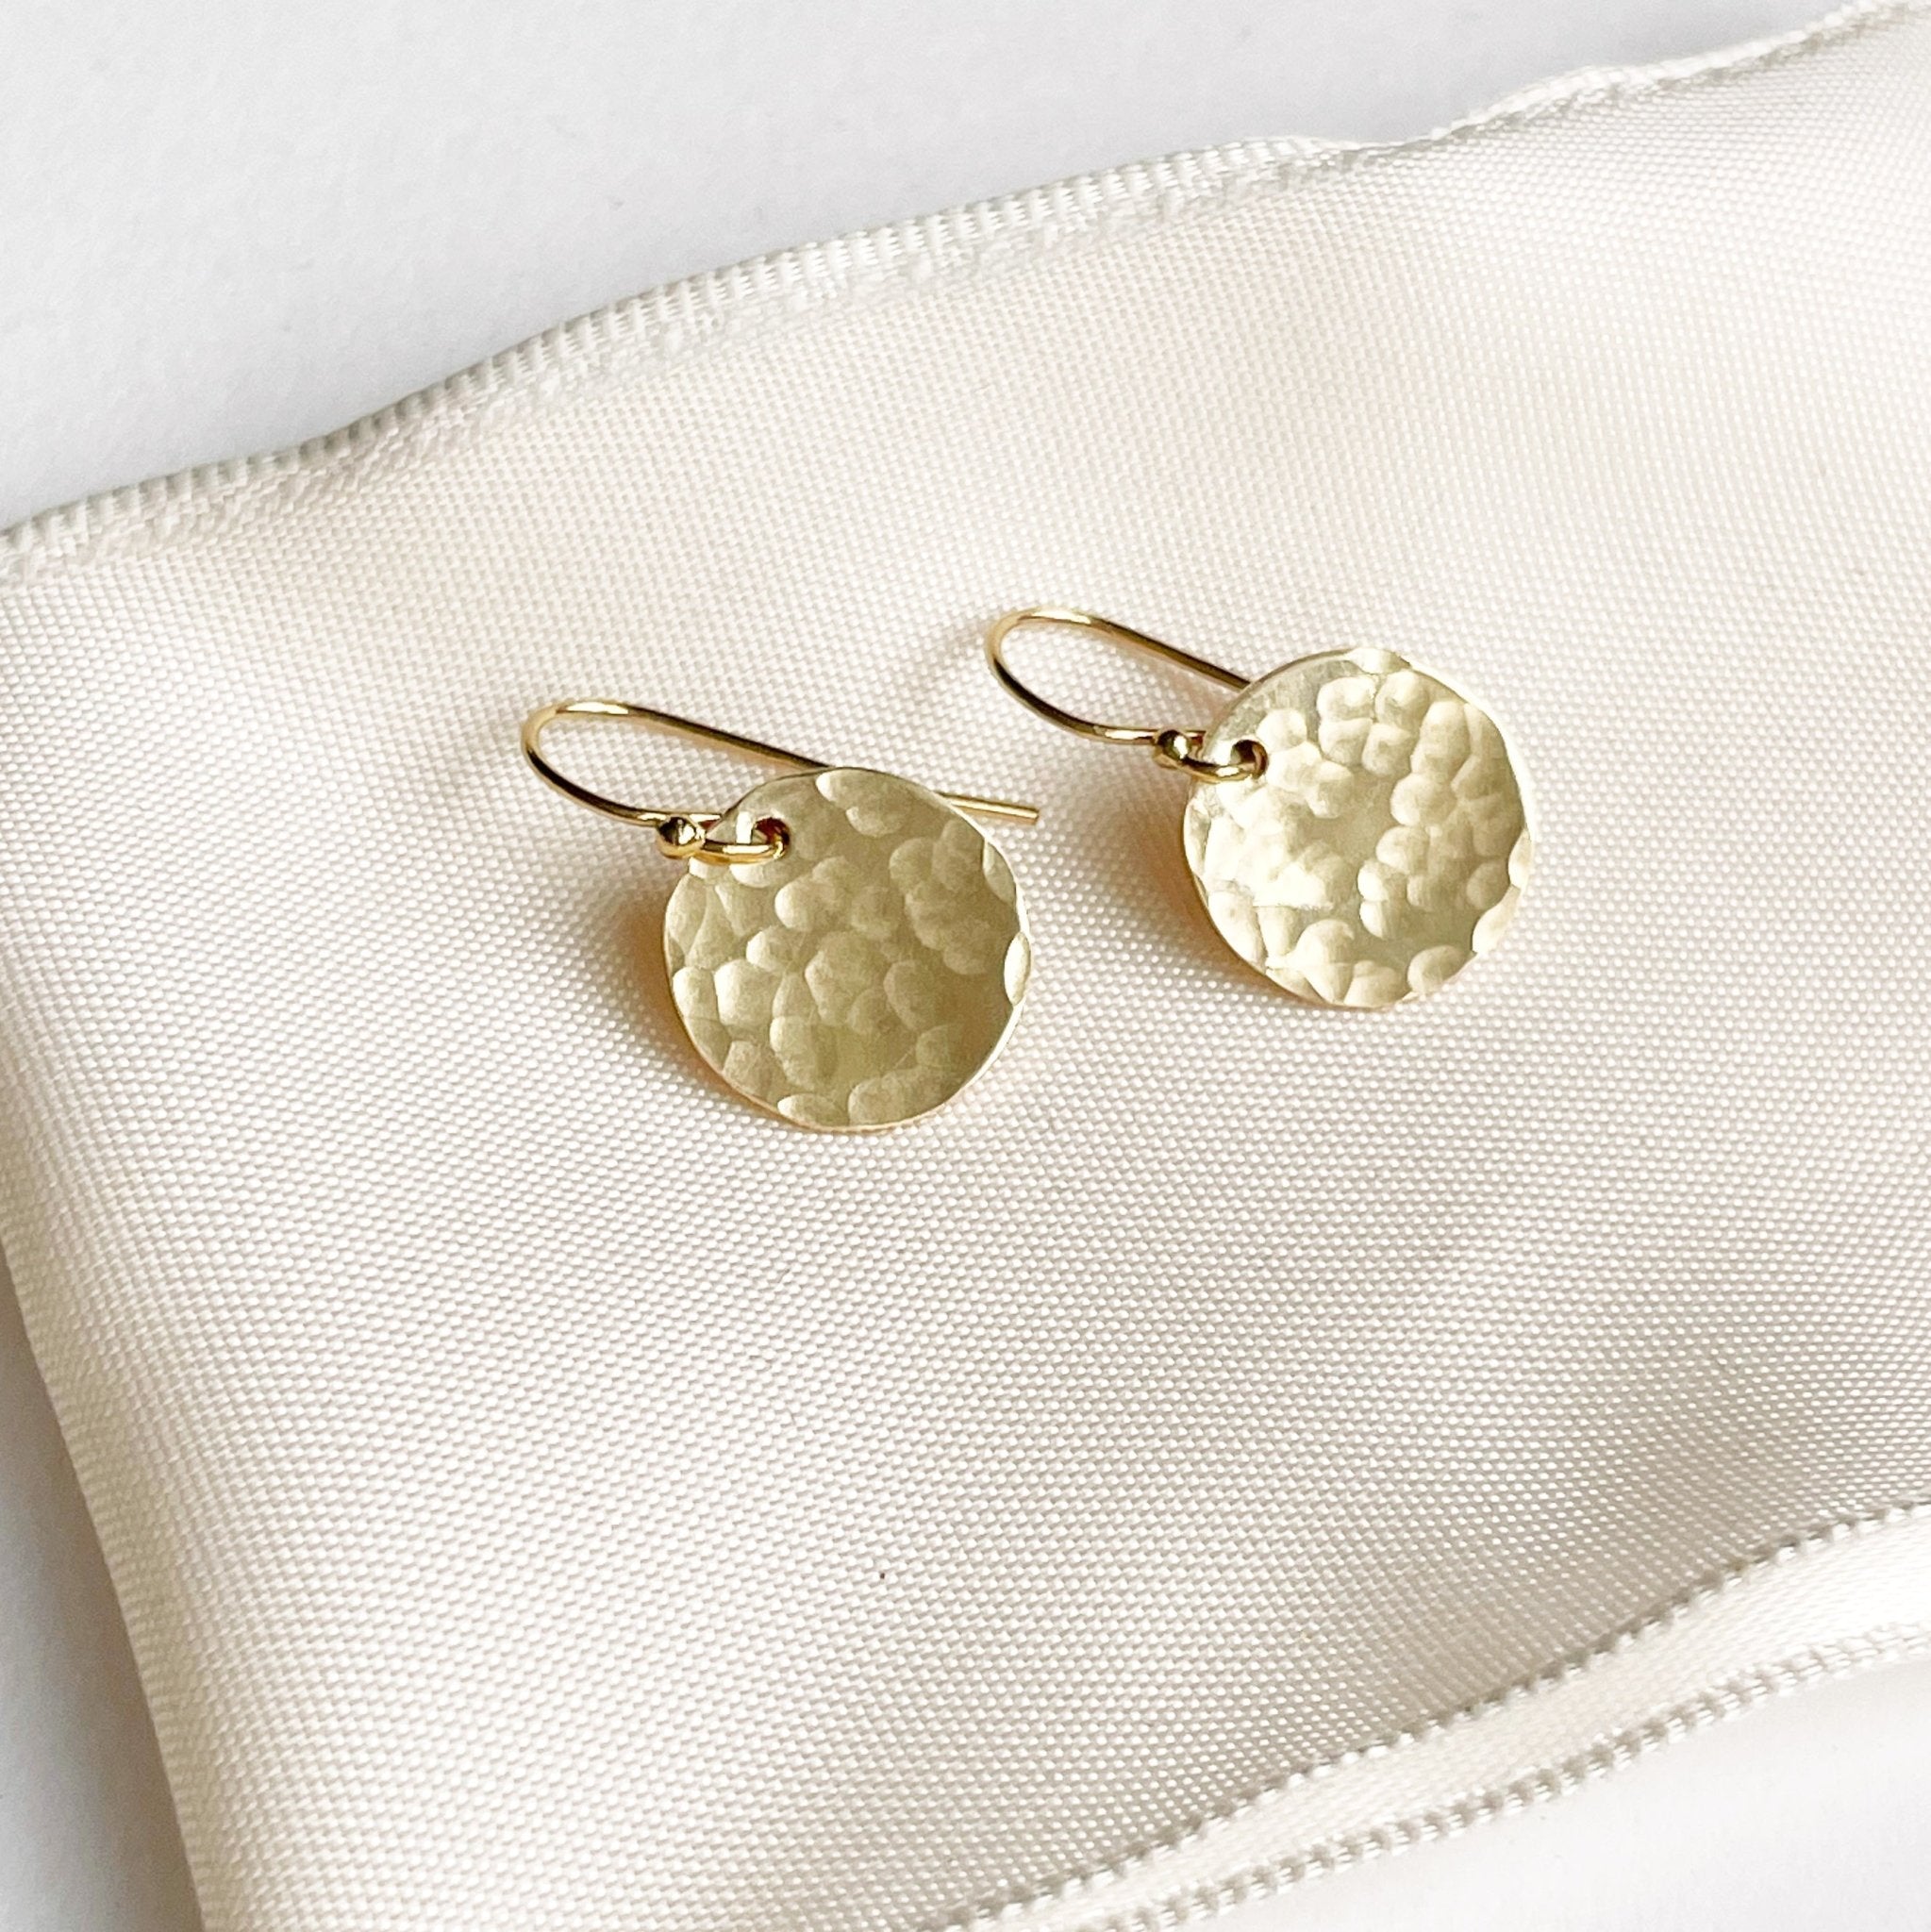 Gold Rachel Earrings by Sarah Cornwell Jewelry. Shimmery, dainty gold 1/2 inch textured disc earrings on a cream background.